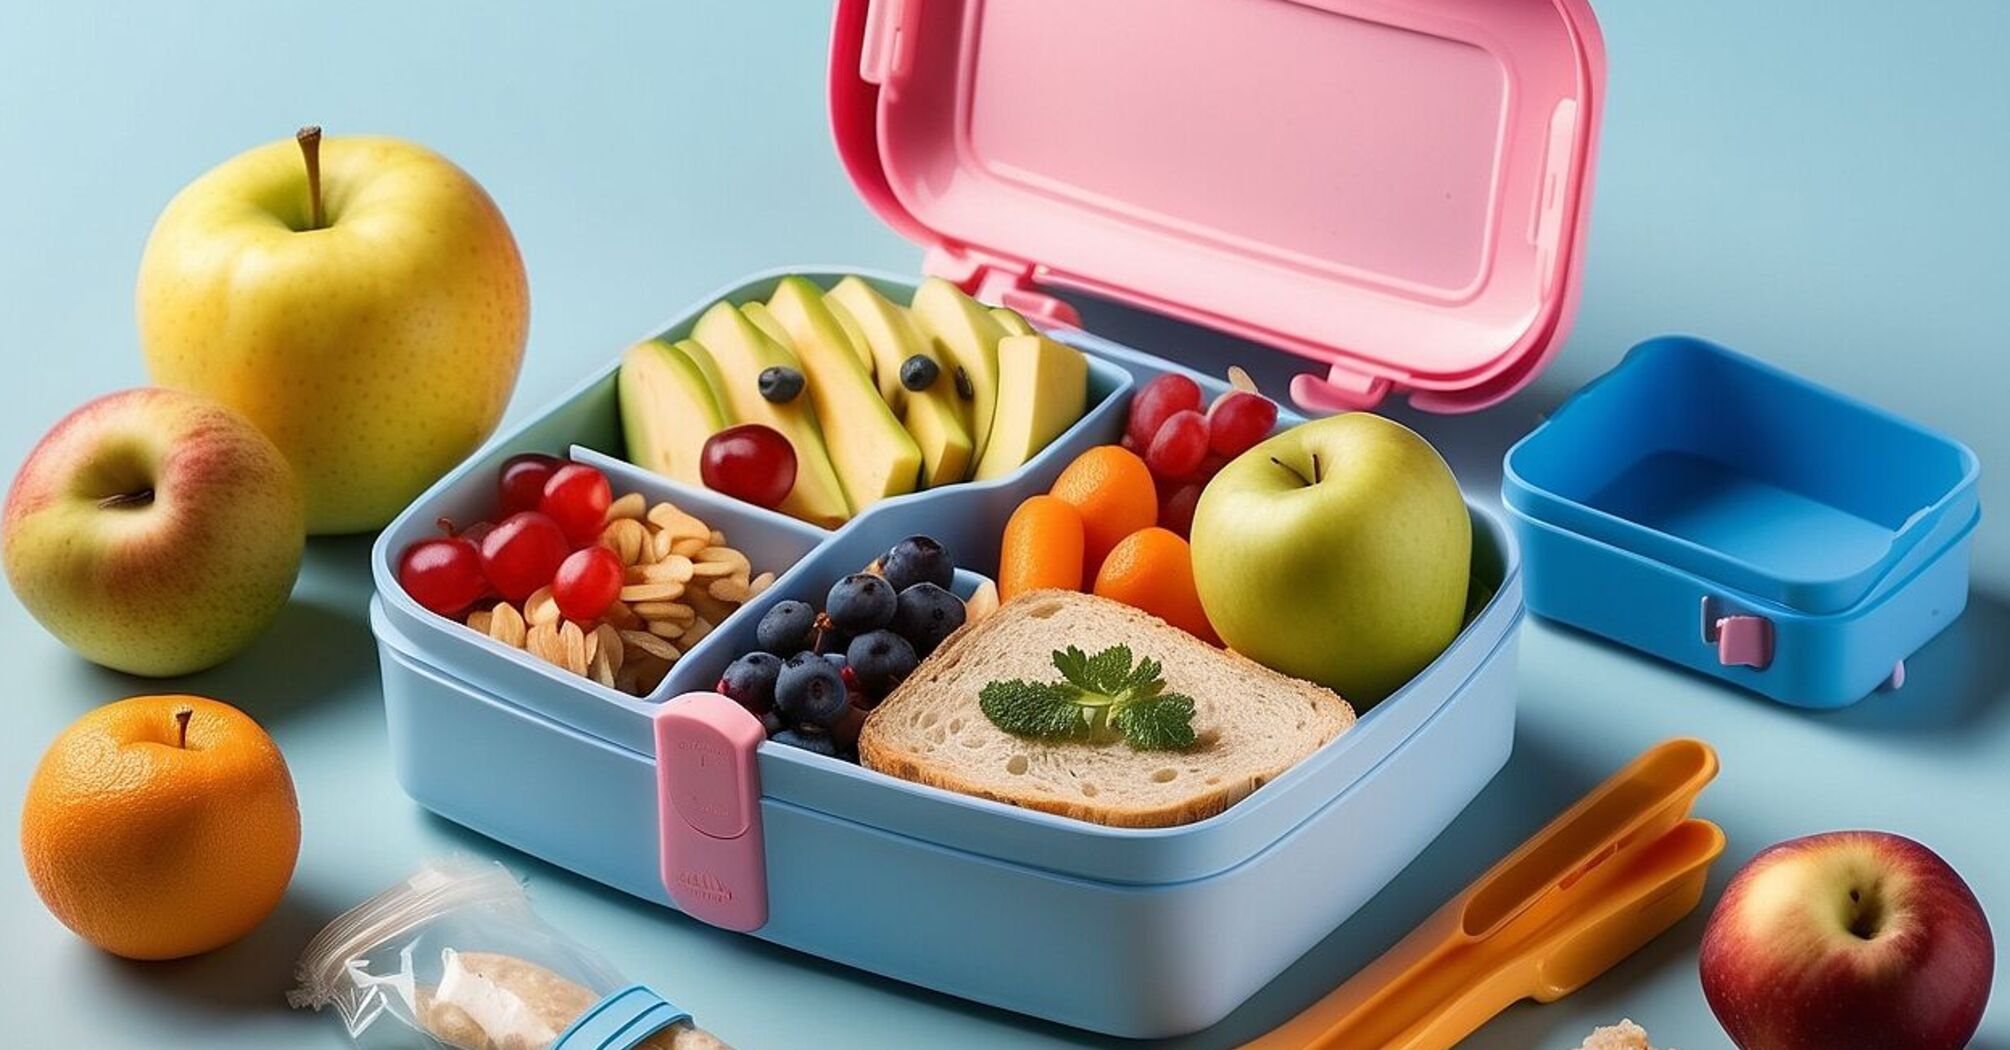 Healthy snacks: what to give your child to school